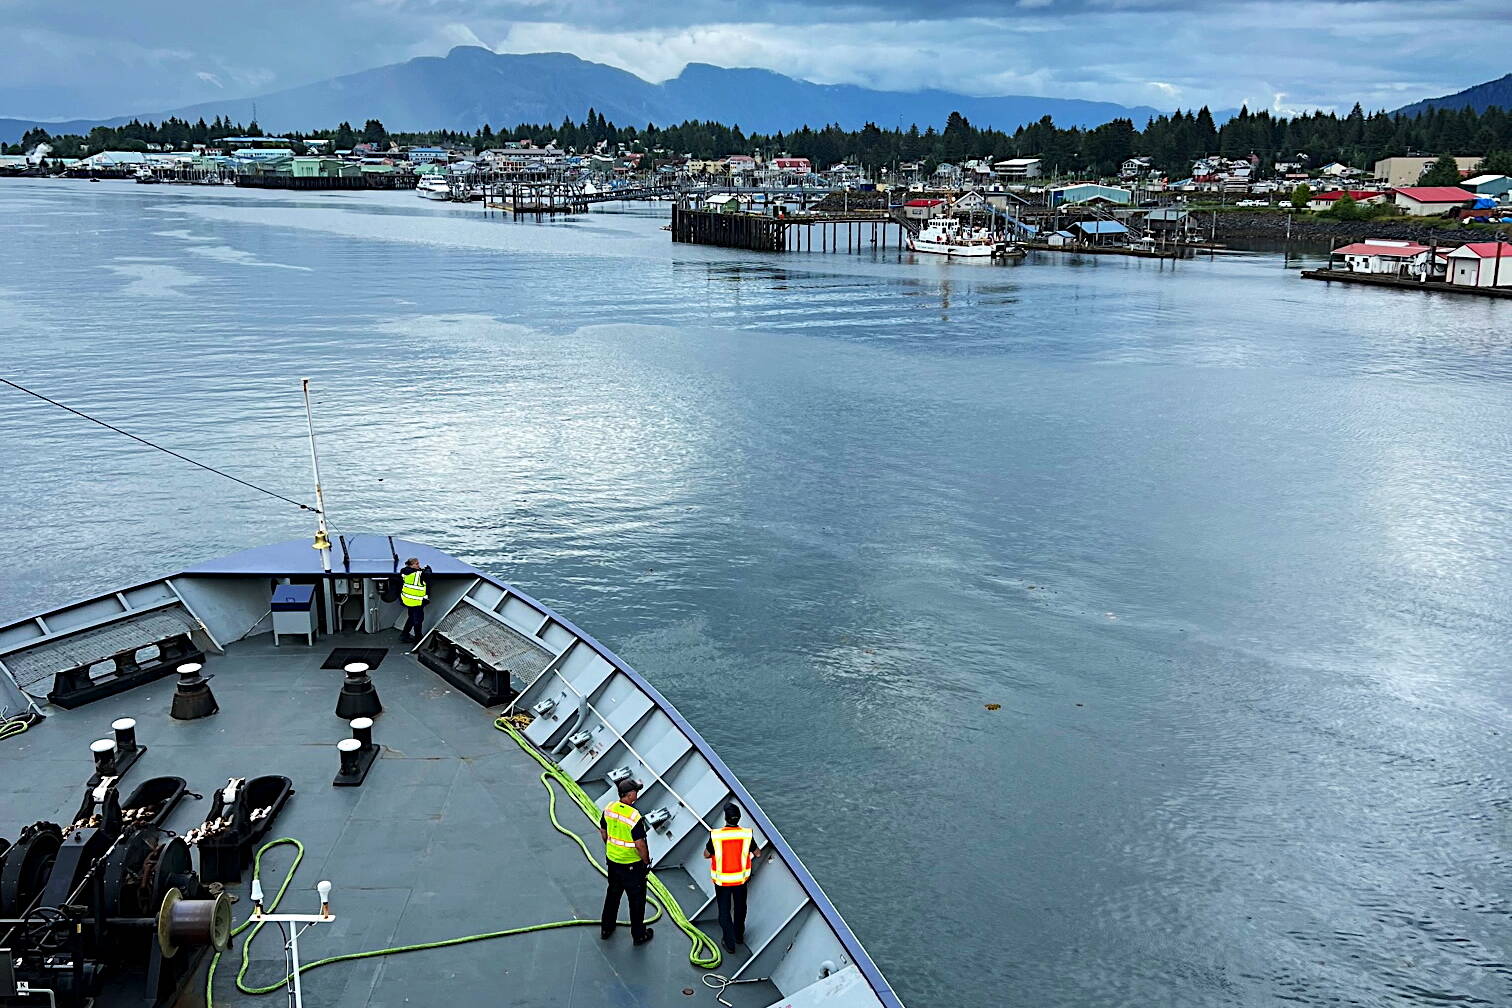 Members of the deck department of the Columbia state ferry get ready to dock the vessel in Petersburg on July 17. A change in the accounting department is expected to lessen the number of payroll complaints among Alaska Marine Highway System employees. (Meredith Jordan / Juneau Empire)